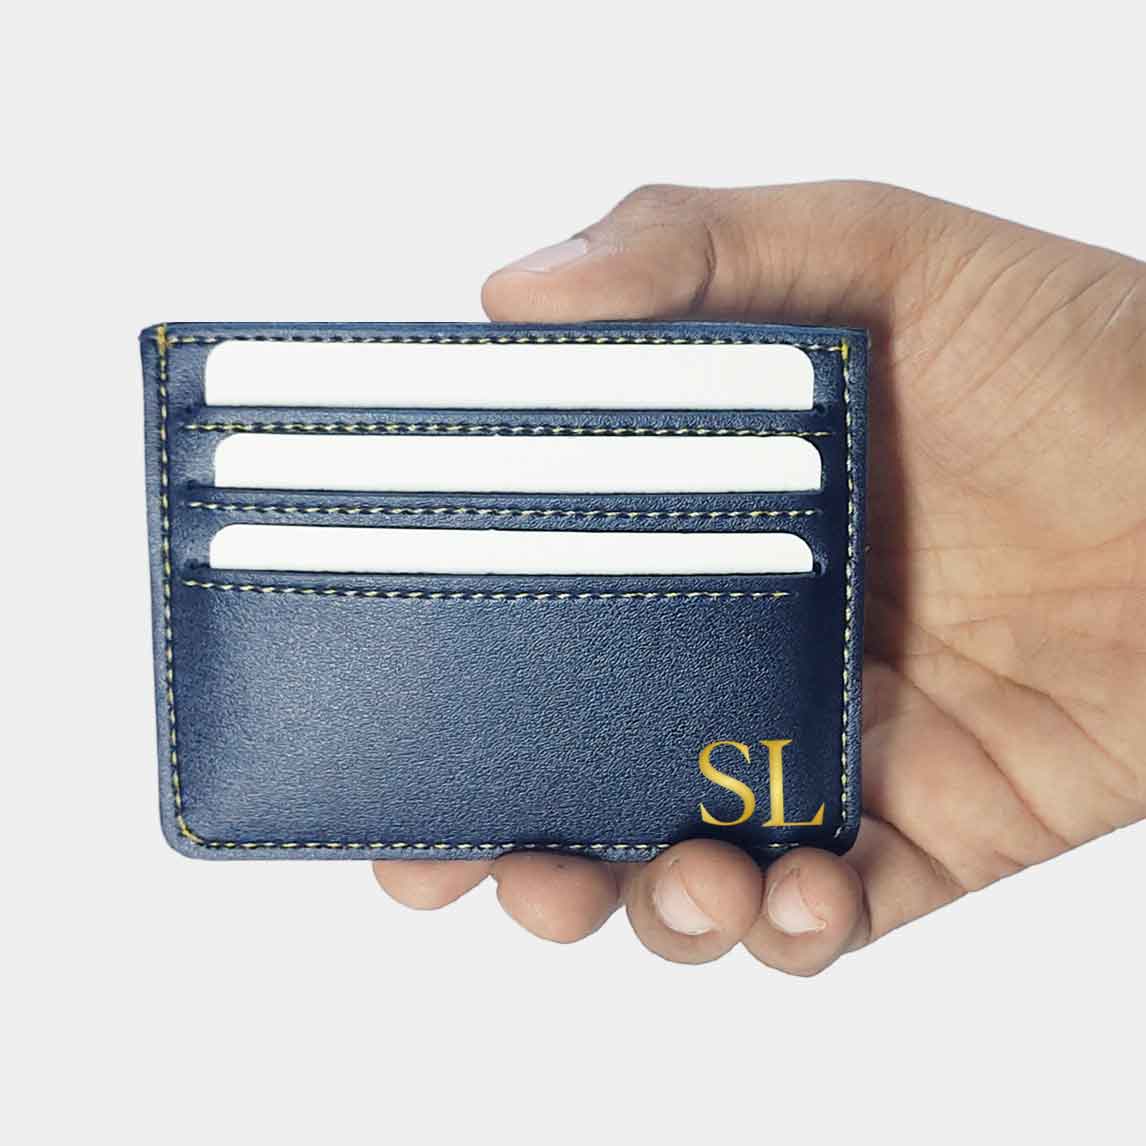 Buy TLN Leather Soft Leather Credit Card Holder Wallet Credit Card Holder  Online at Low Prices in India - Paytmmall.com